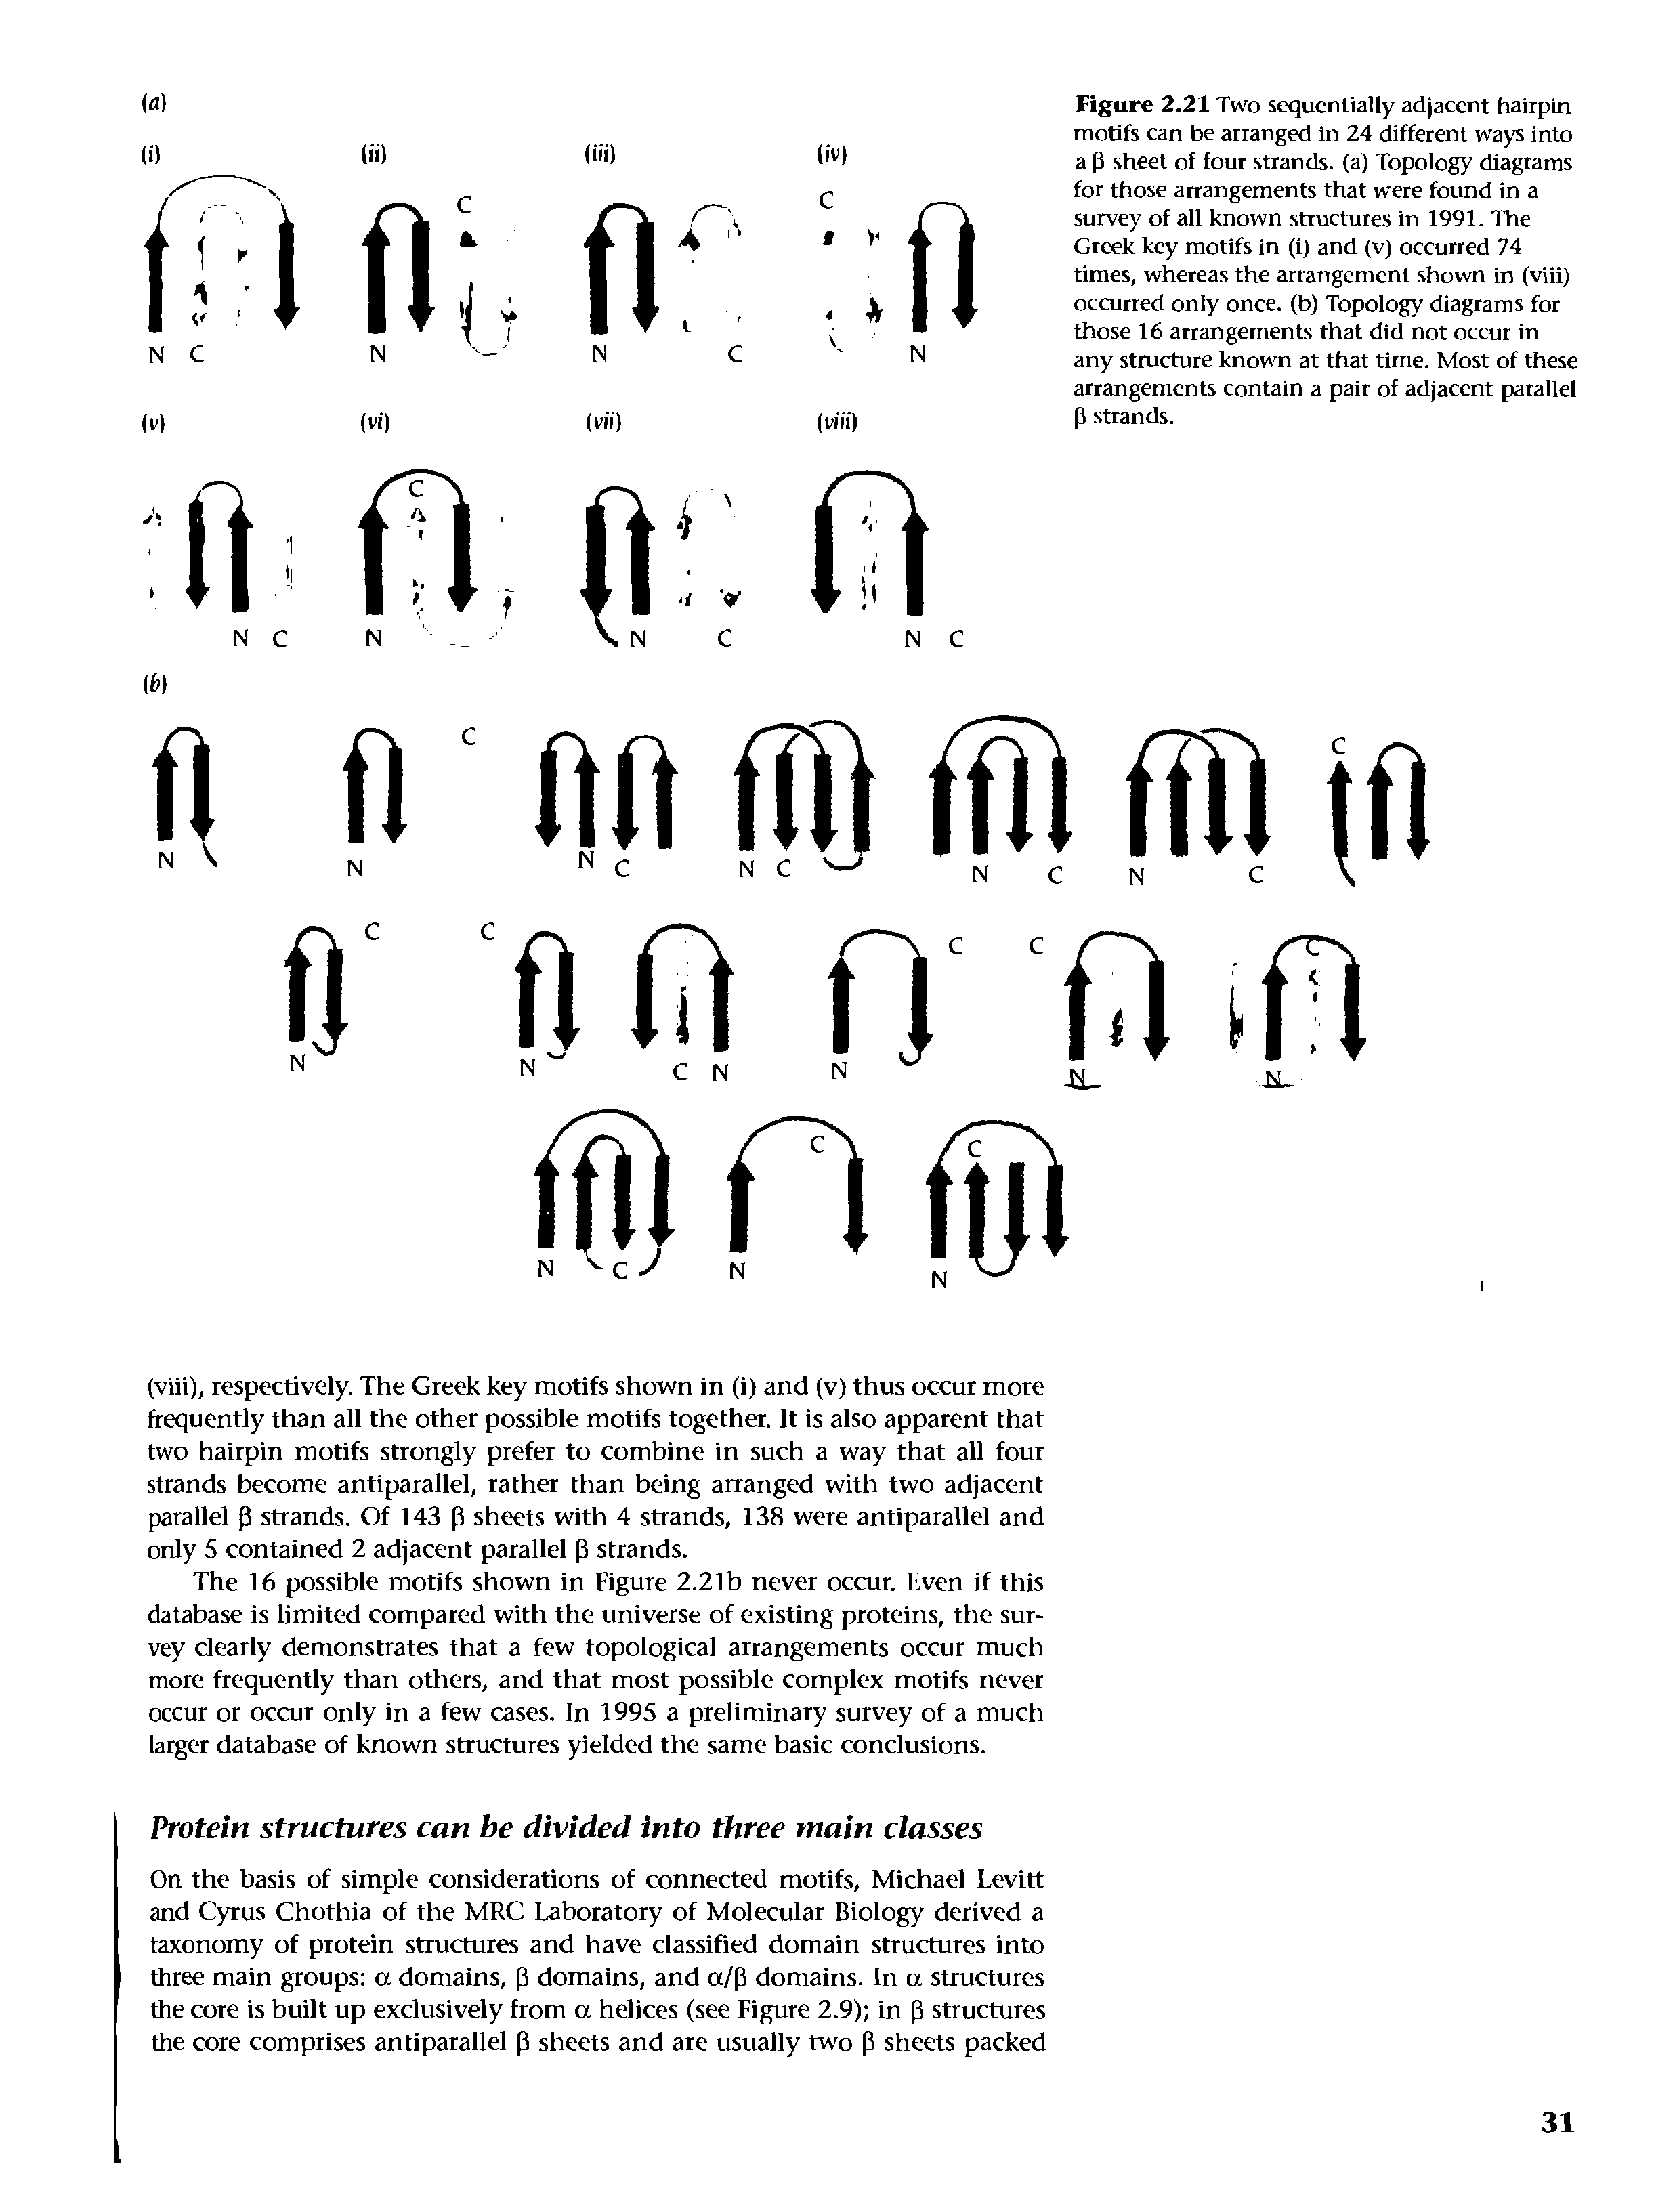 Figure 2.21 Two sequentially adjacent hairpin motifs can be arranged in 24 different ways into a p sheet of four strands, (a) Topology diagrams for those arrangements that were found in a survey of all known structures in 1991. The Greek key motifs in (1) and (v) occurred 74 times, whereas the arrangement shown in (viii) occurred only once, (b) Topology diagrams for those 16 arrangements that did not occur in any structure known at that time. Most of these arrangements contain a pair of adjacent parallel P strands.